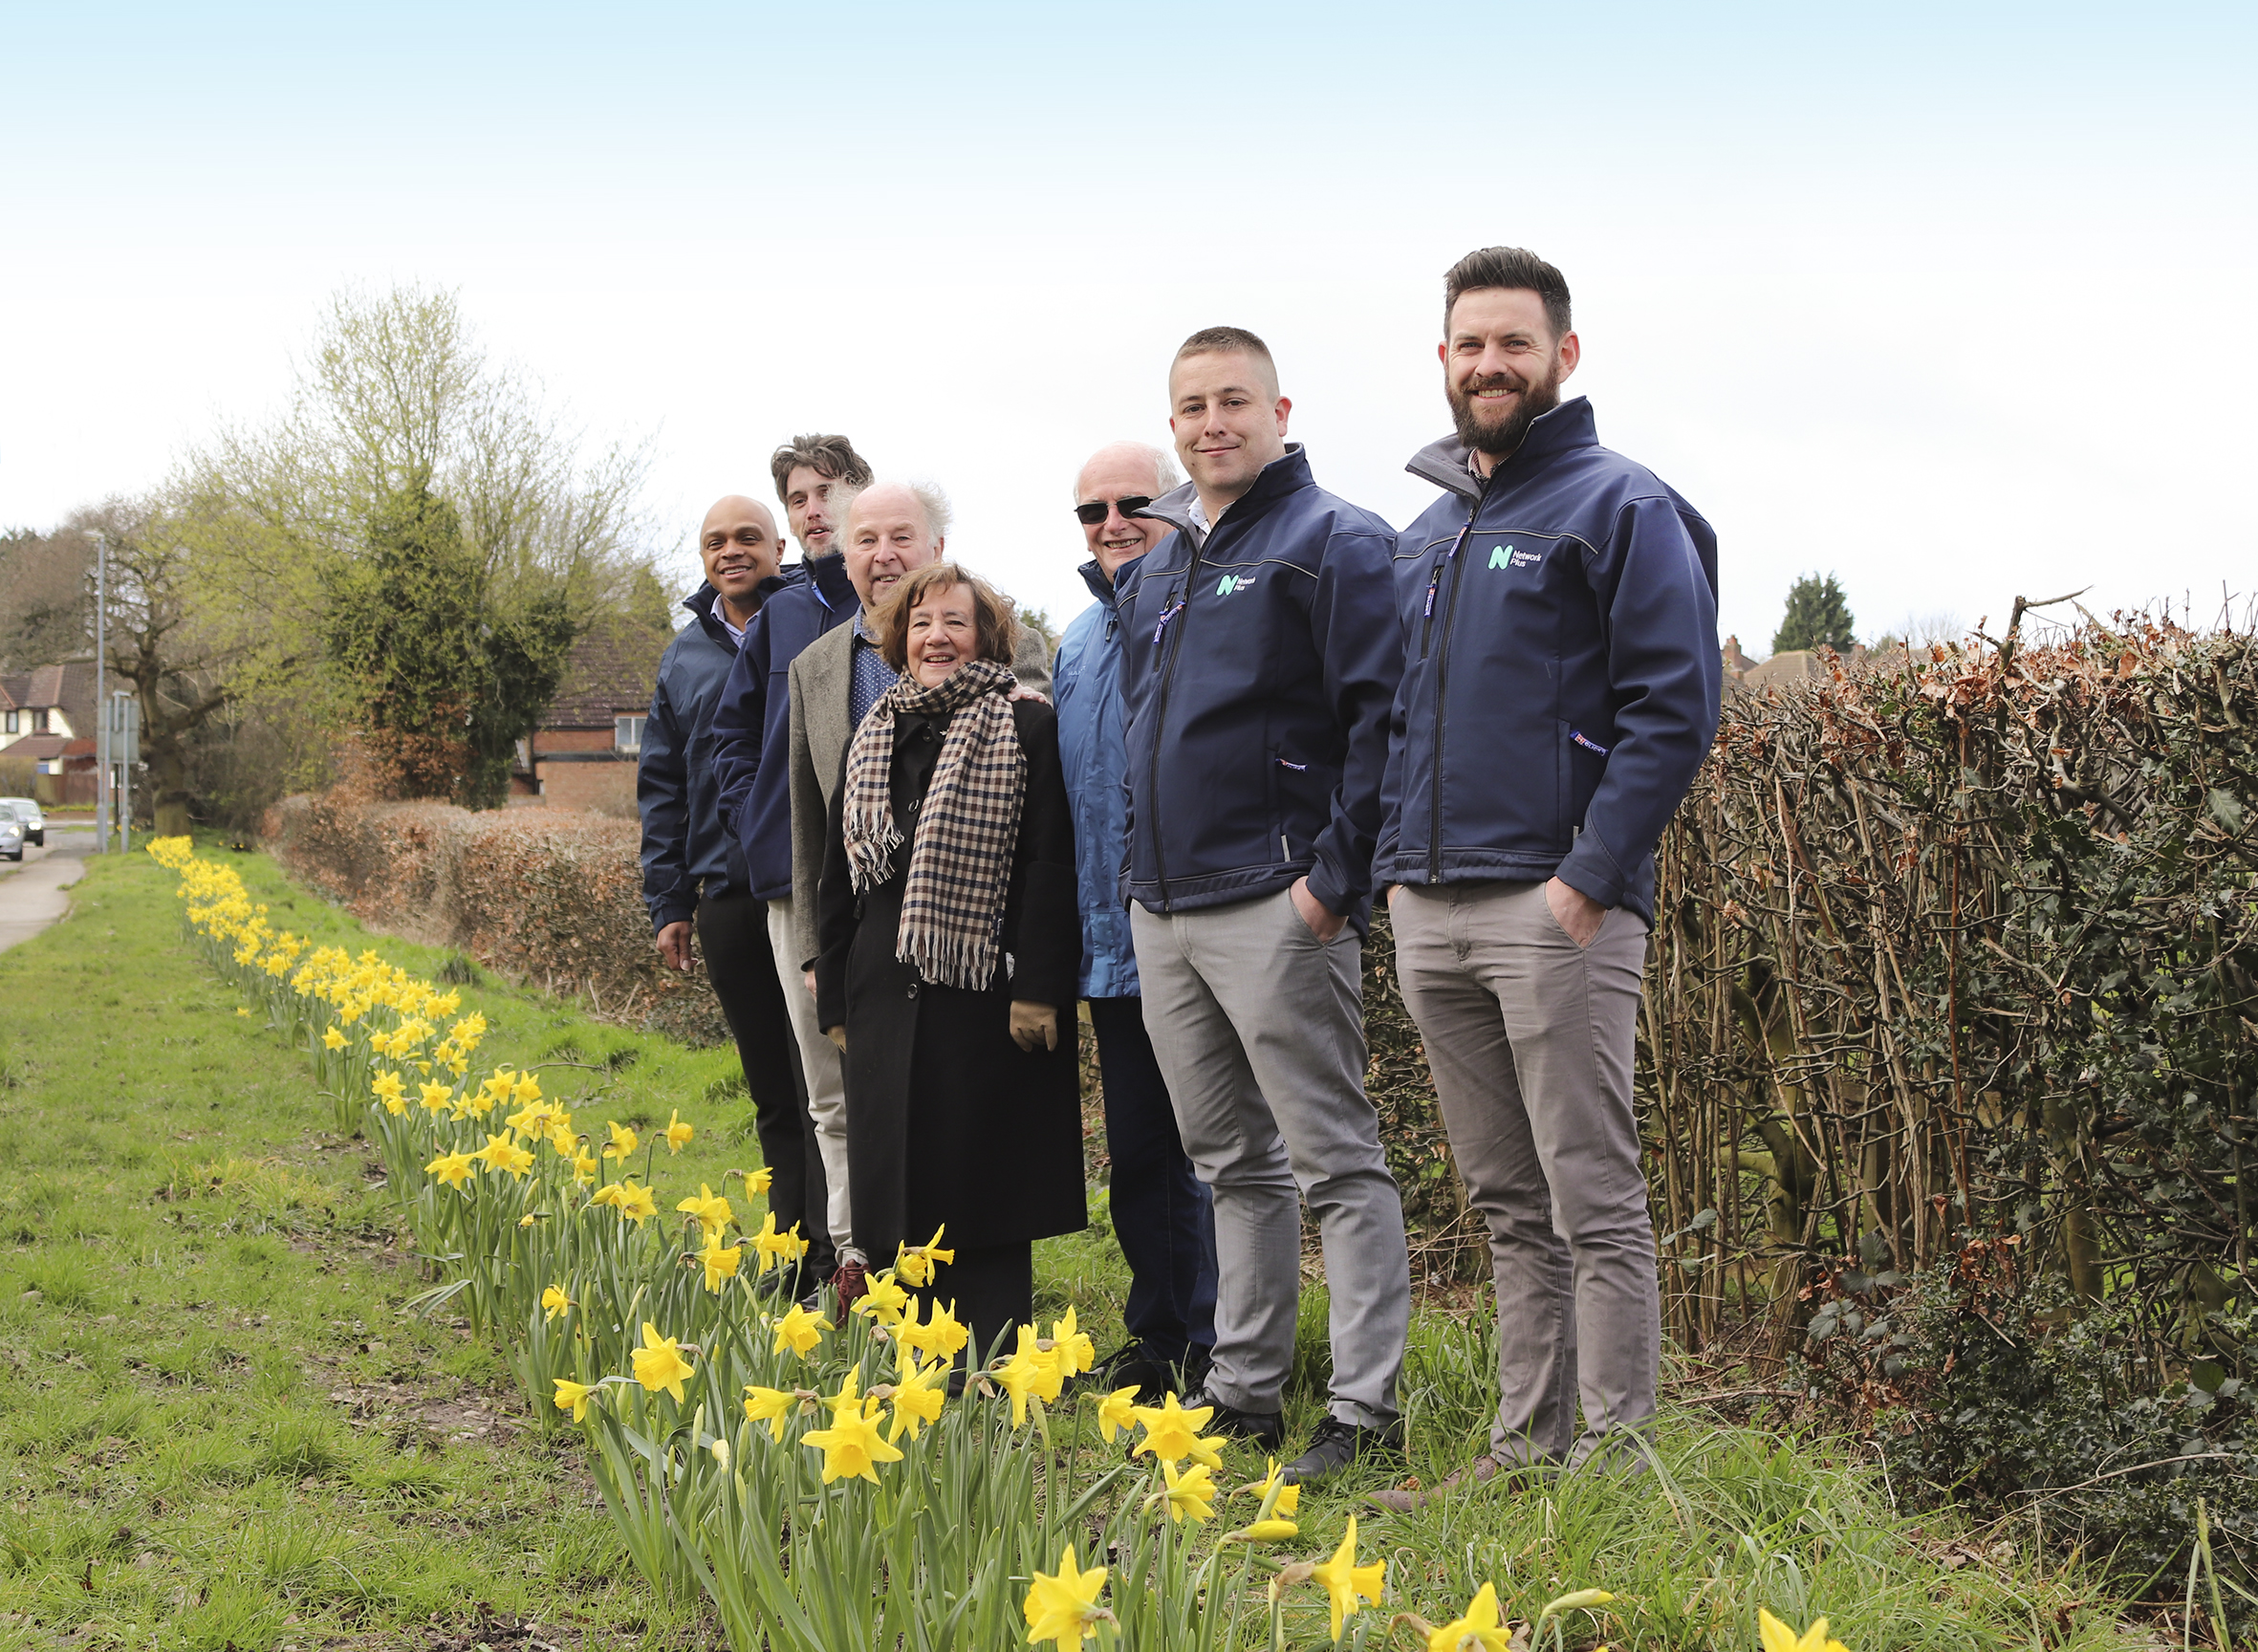 Photo of the daffodils with those involved